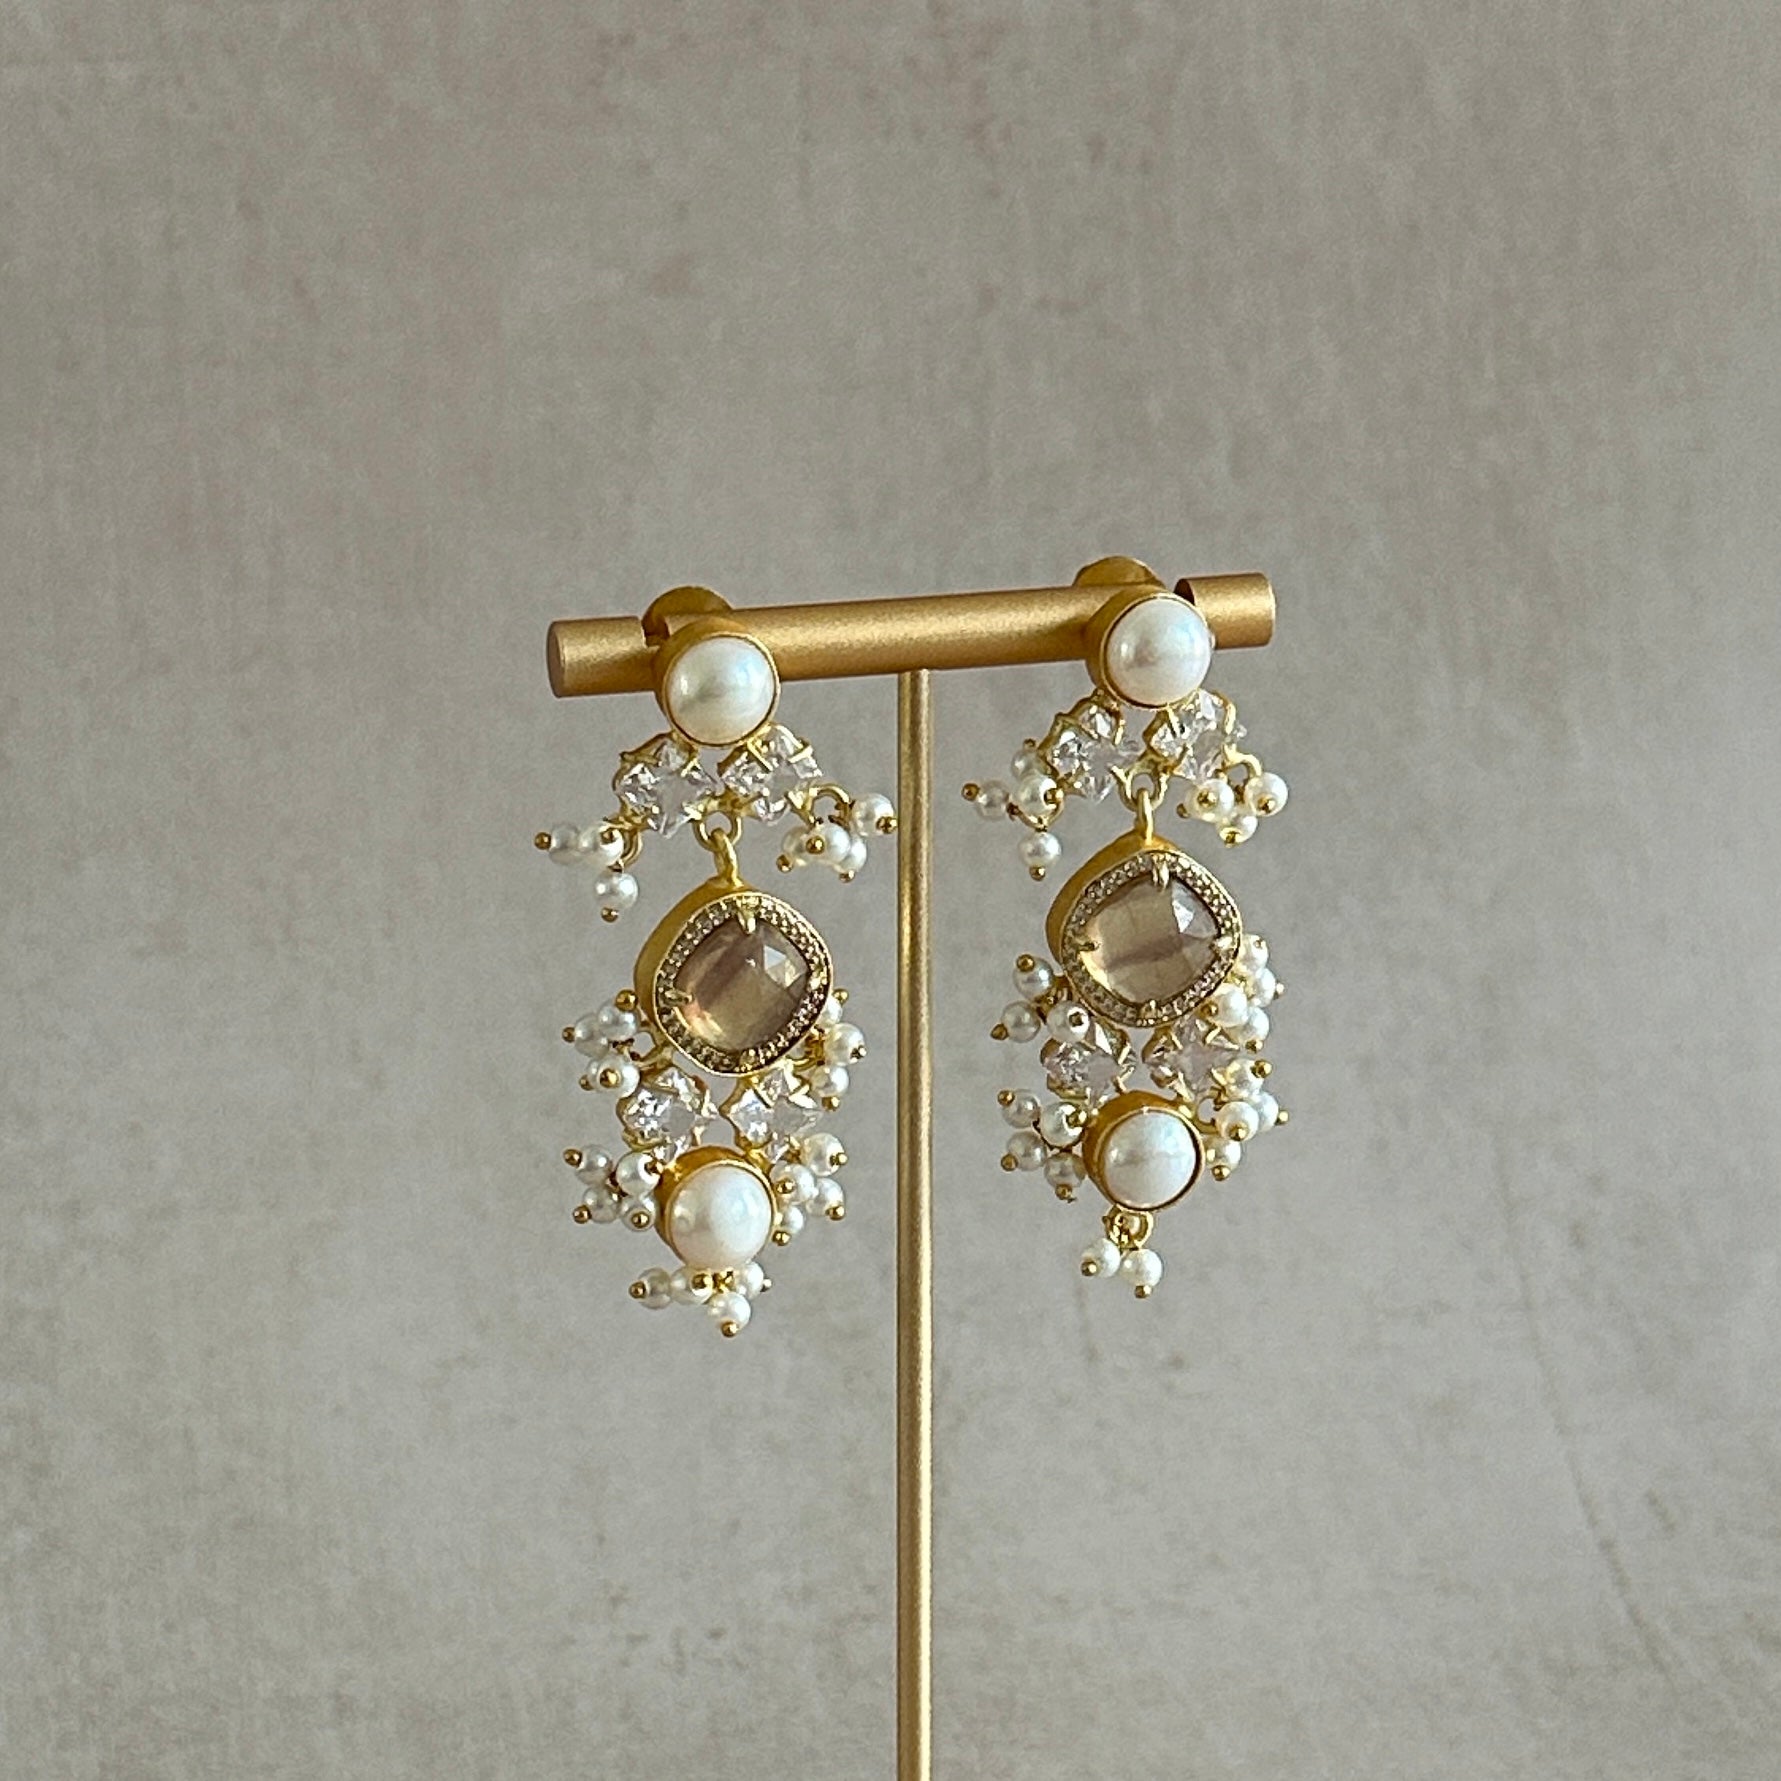 Behold the beauty of these exquisite Sana Honey Quartz Earrings. Crafted from shimmering honey quartz and adorned with pearl accents and sparkling cz crystals, these earrings are perfect for any special occasion. Add an air of refinement and sophistication to your style with these luxurious earrings.